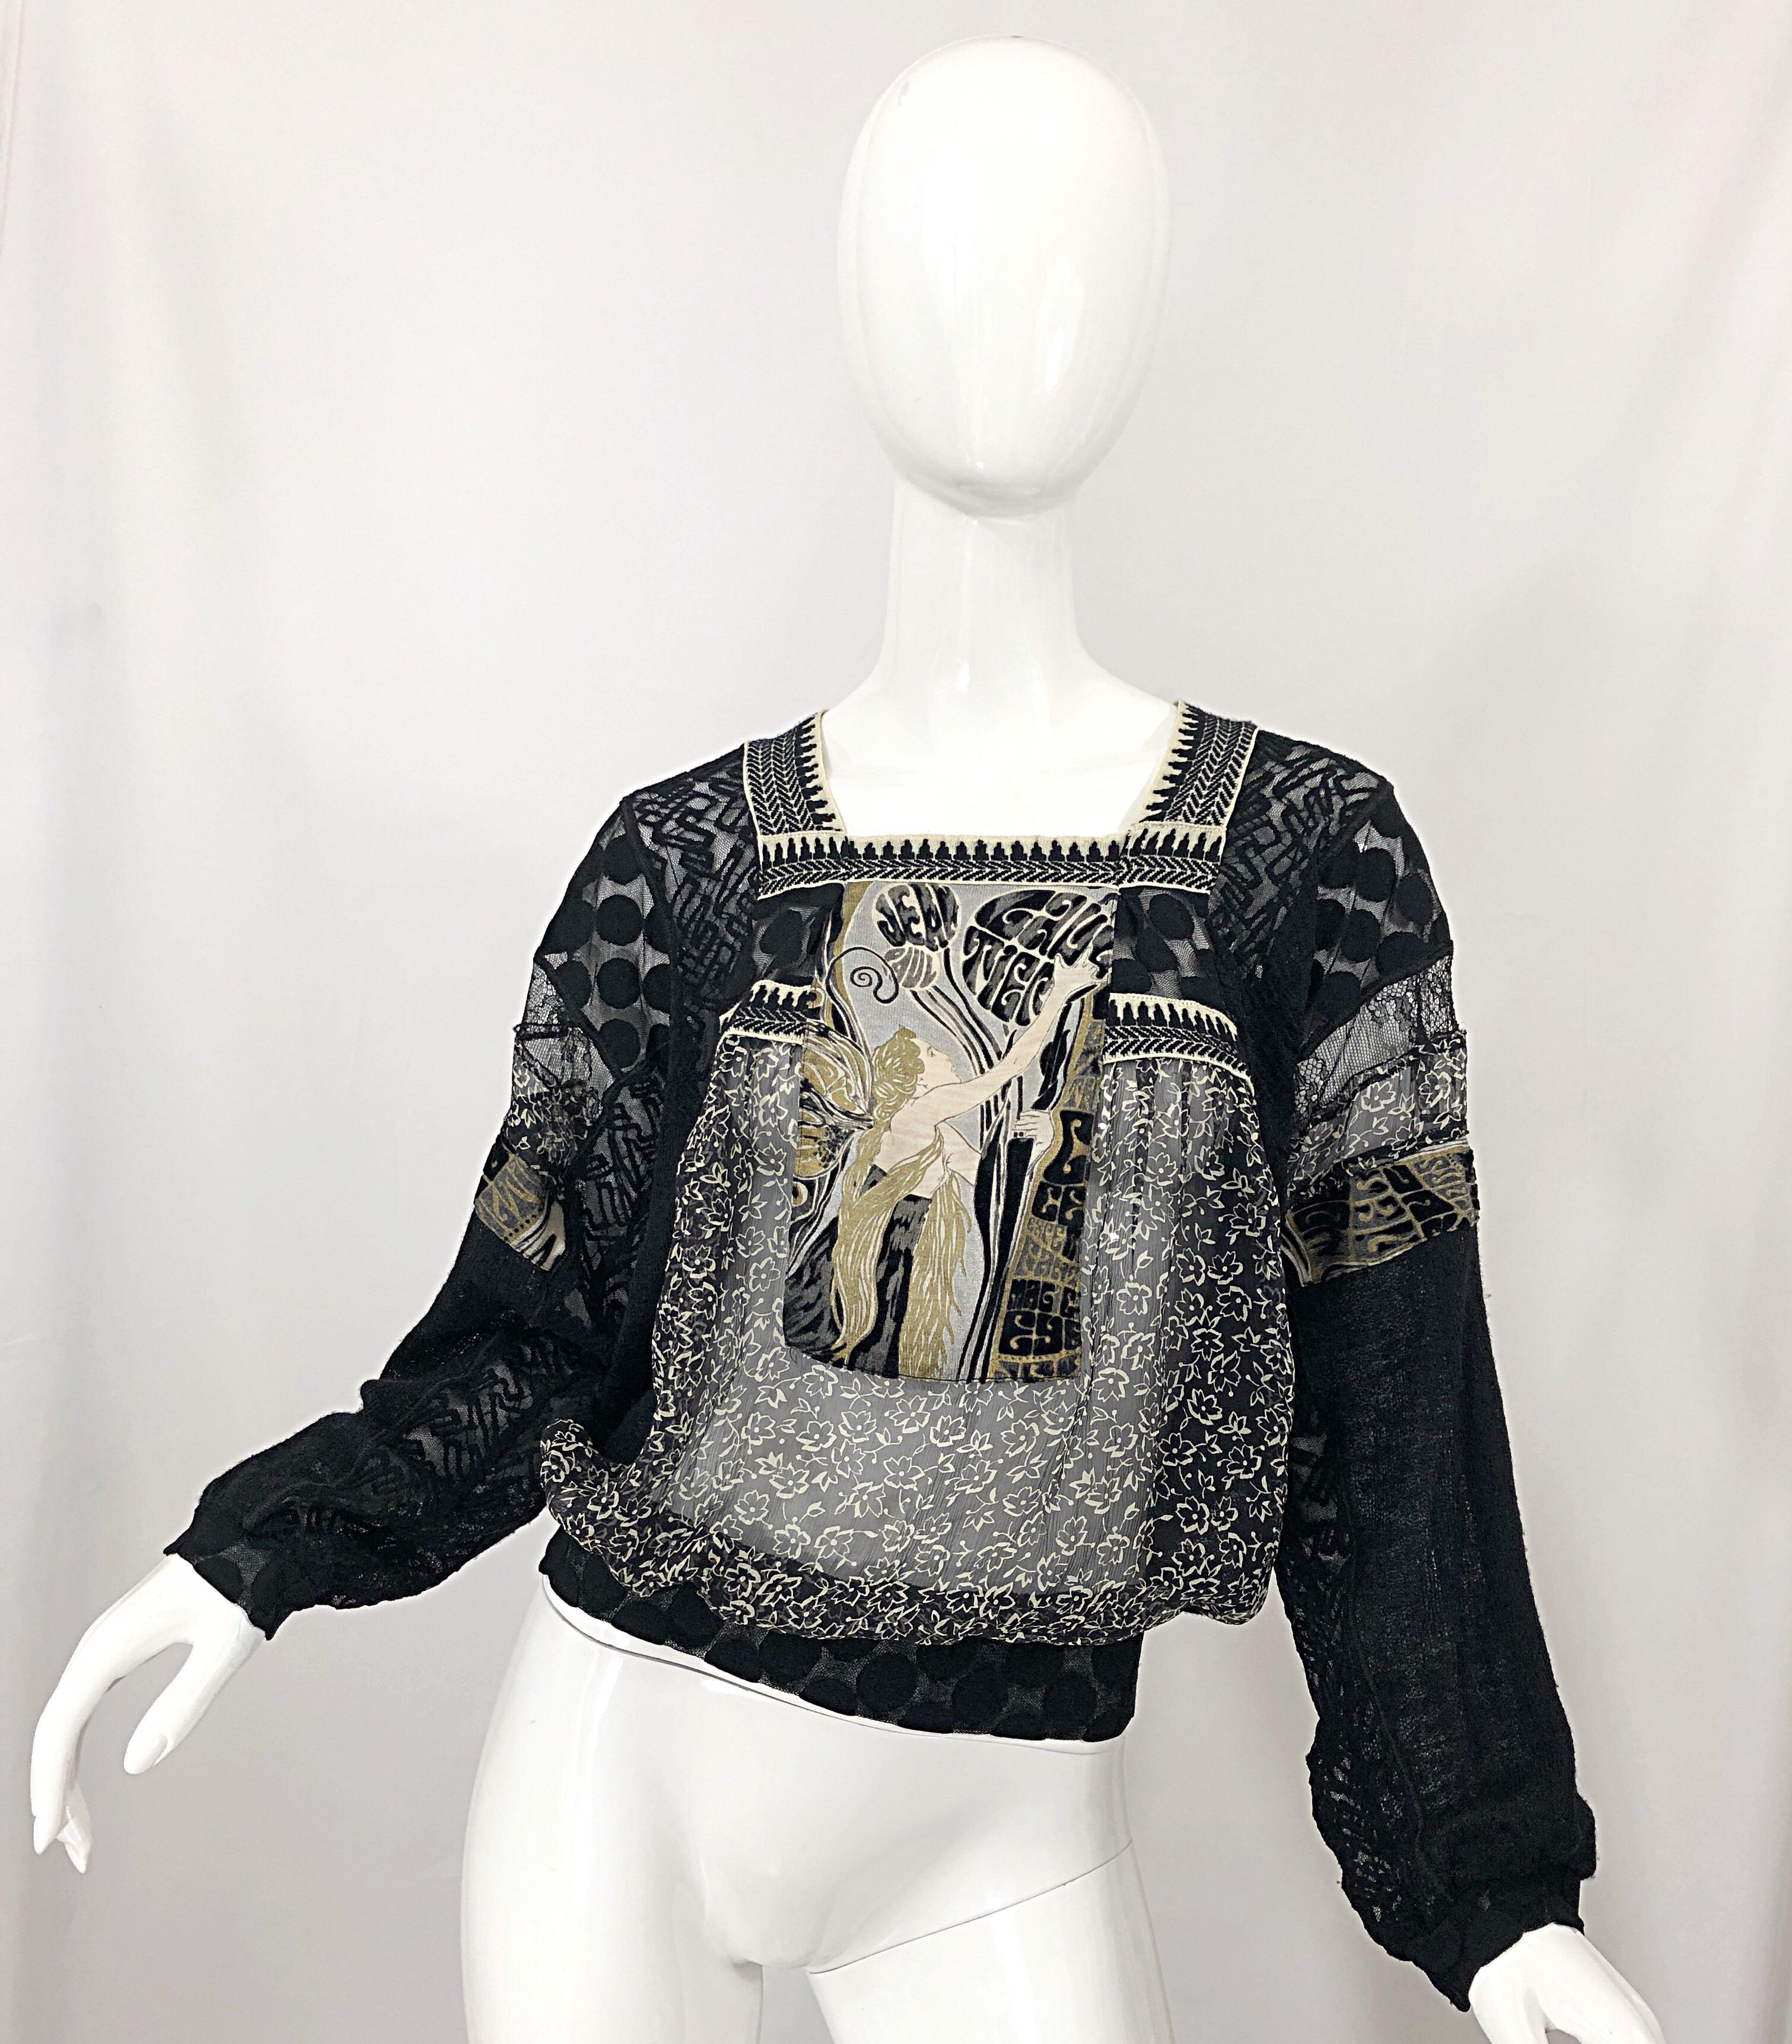 Incredible vintage 90s JEAN PAUL GAULTIER hand painted Rapunzel sheer top! Features a Rapunzel character hand painted in gold on the front. Sheer black and invory floral print sheer chiffon. Signature mesh fabric mixed throughout. Simply slips over